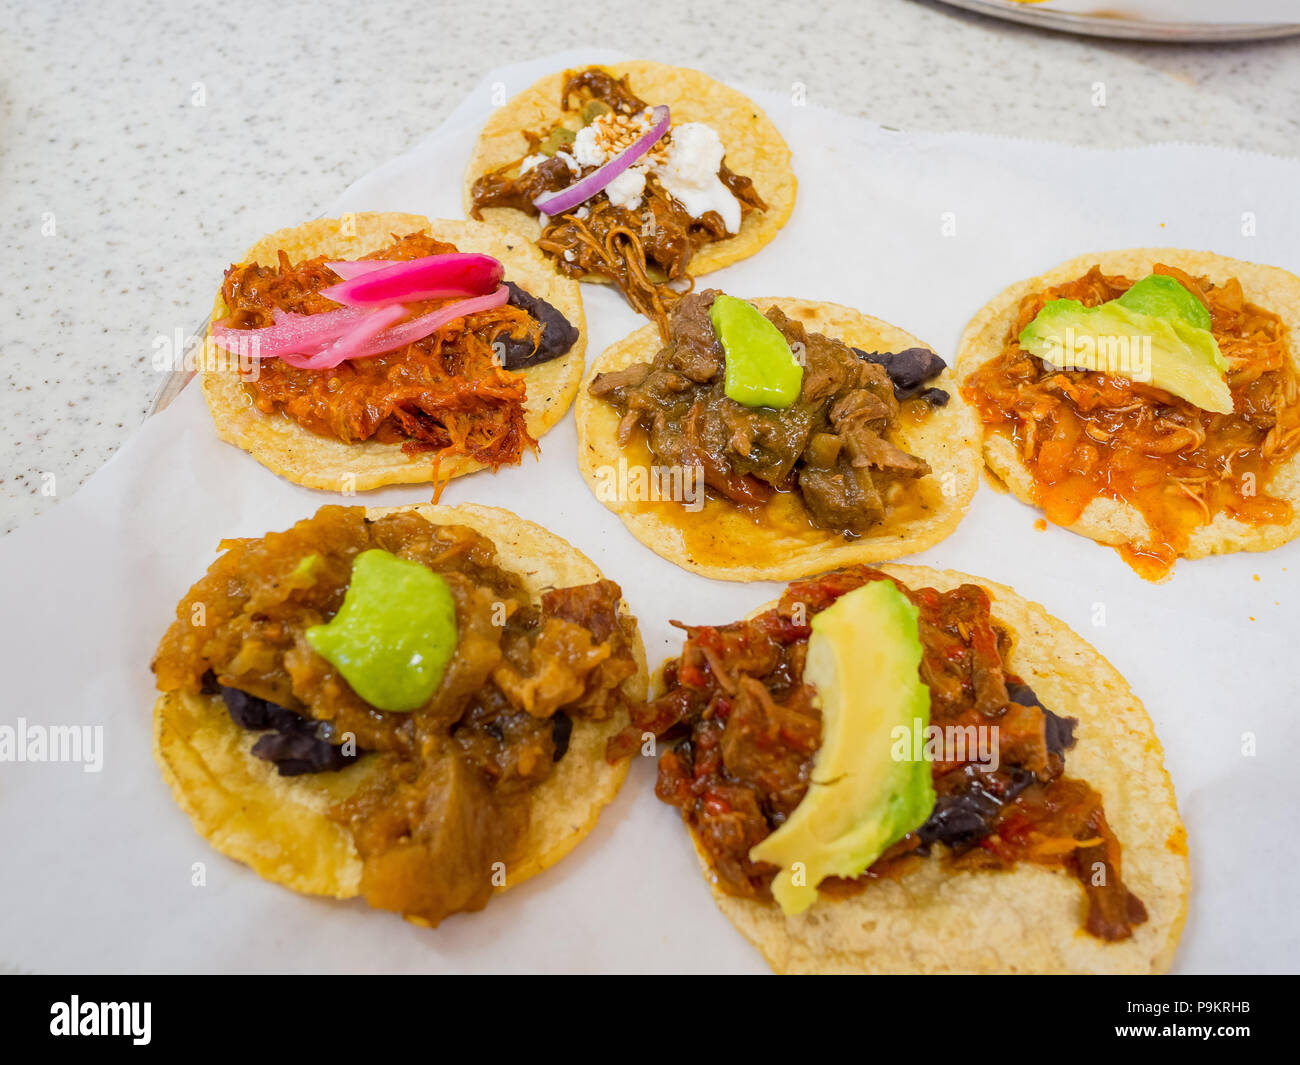 Close up shot of sixe meat teco sampler, ate at Los Angeles, California Stock Photo